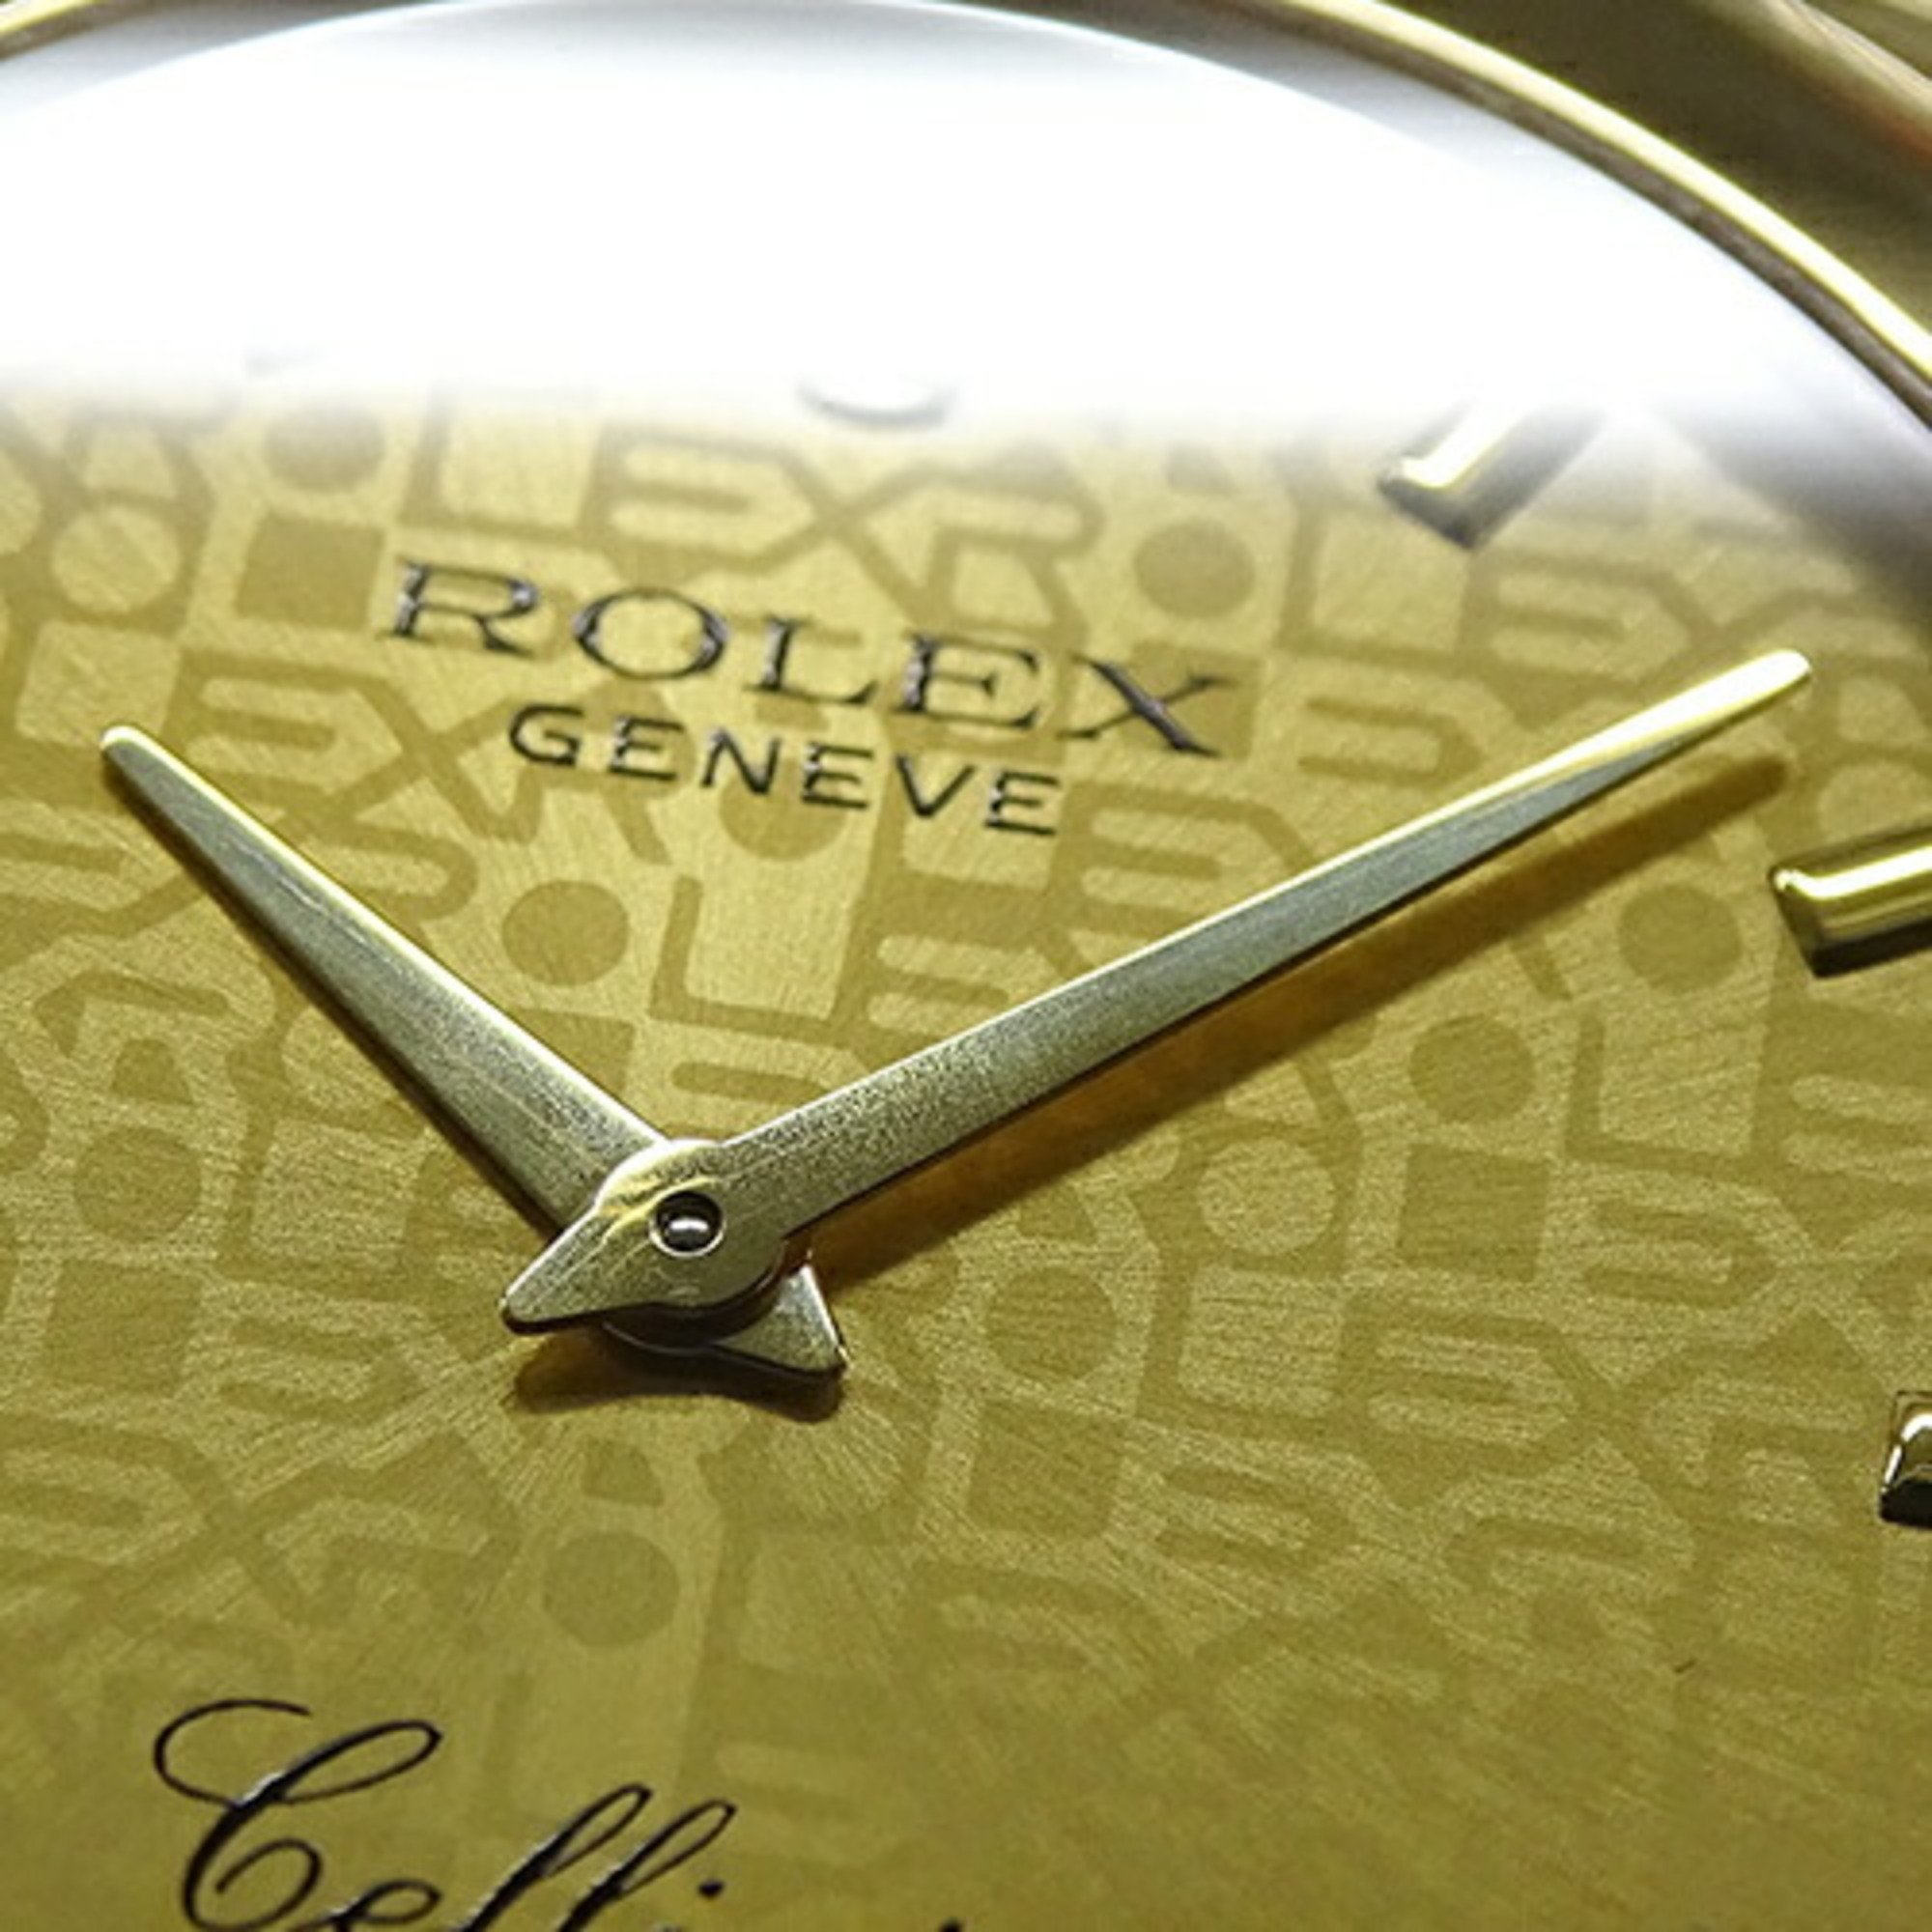 Rolex Cellini 6623/8 E Series Men's Watch Quartz 750YG 18K Leather Gold Round Replacement Strap Included Polished